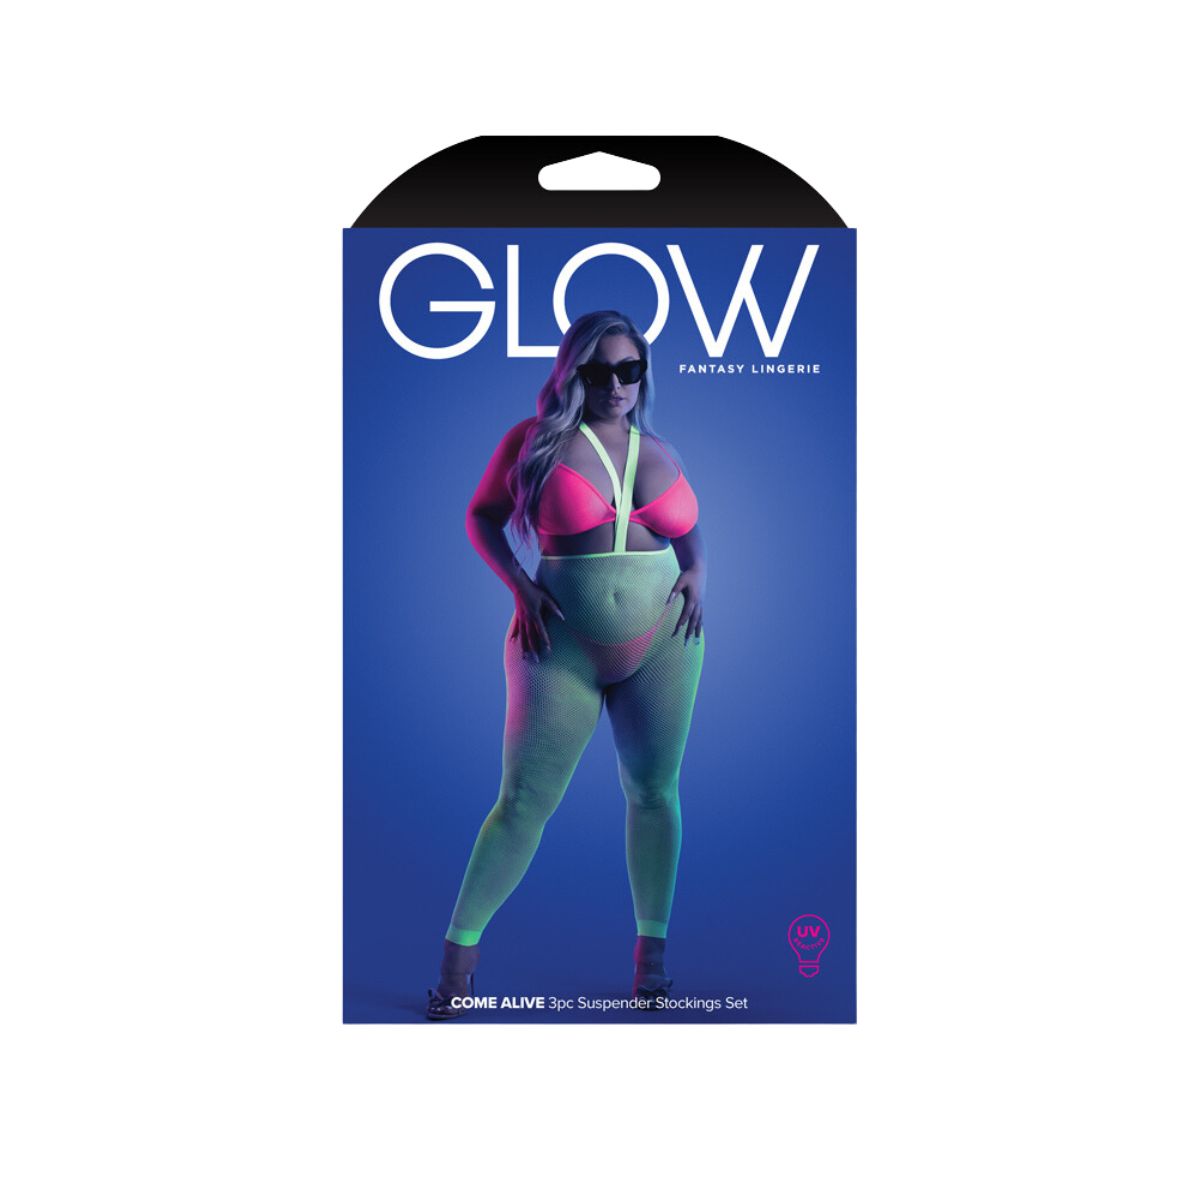 Glow Come Alive Bralette, G-String & Suspender Stockings set - Queen Size